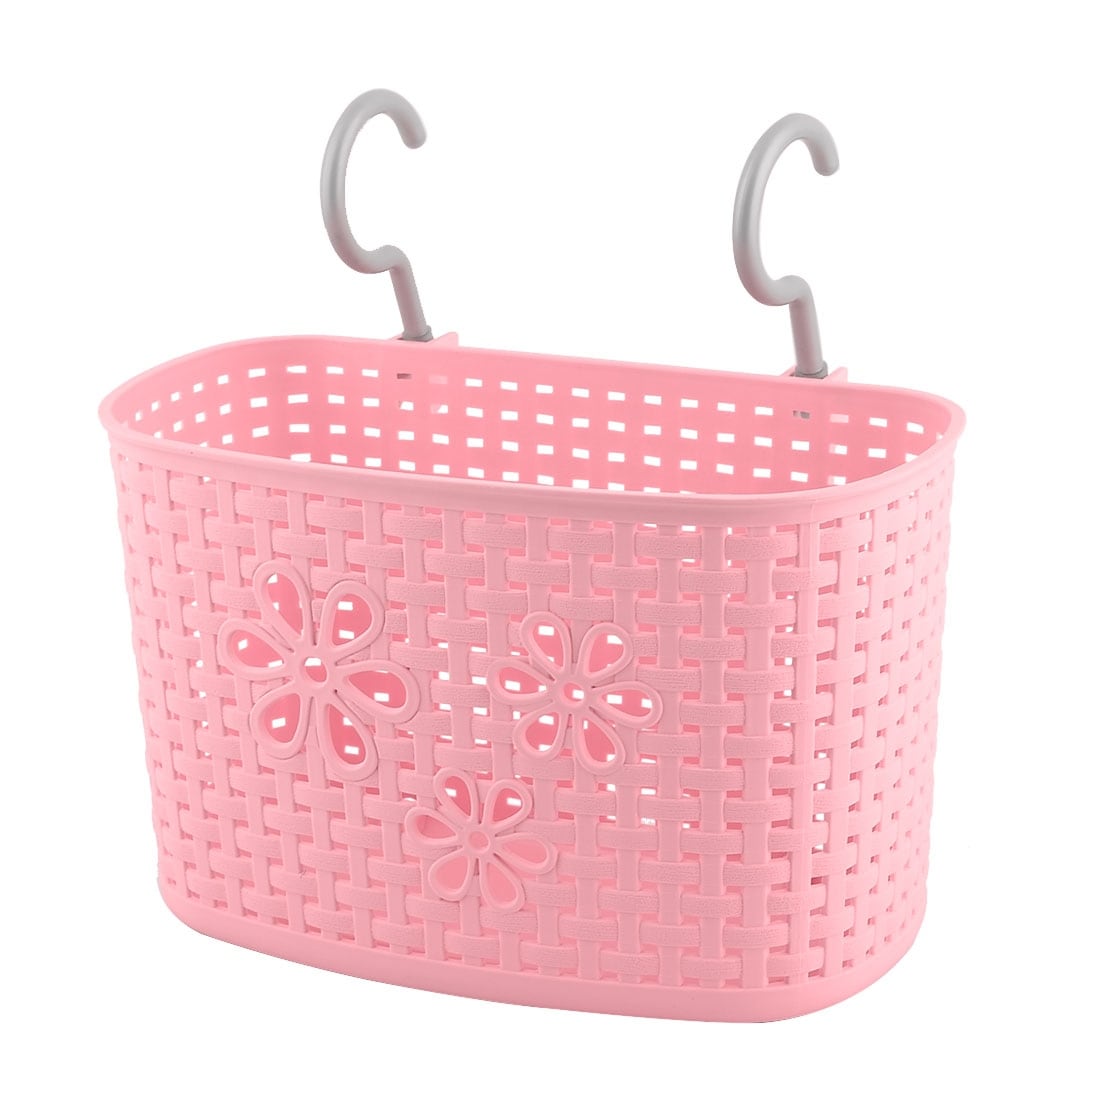 https://ak1.ostkcdn.com/images/products/is/images/direct/79853463bf7c9dc288a17c4070a4ef24876e19a0/Household-Kitchen-Plastic-Rectangular-Hanging-Hook-Storage-Basket-Container-Pink.jpg